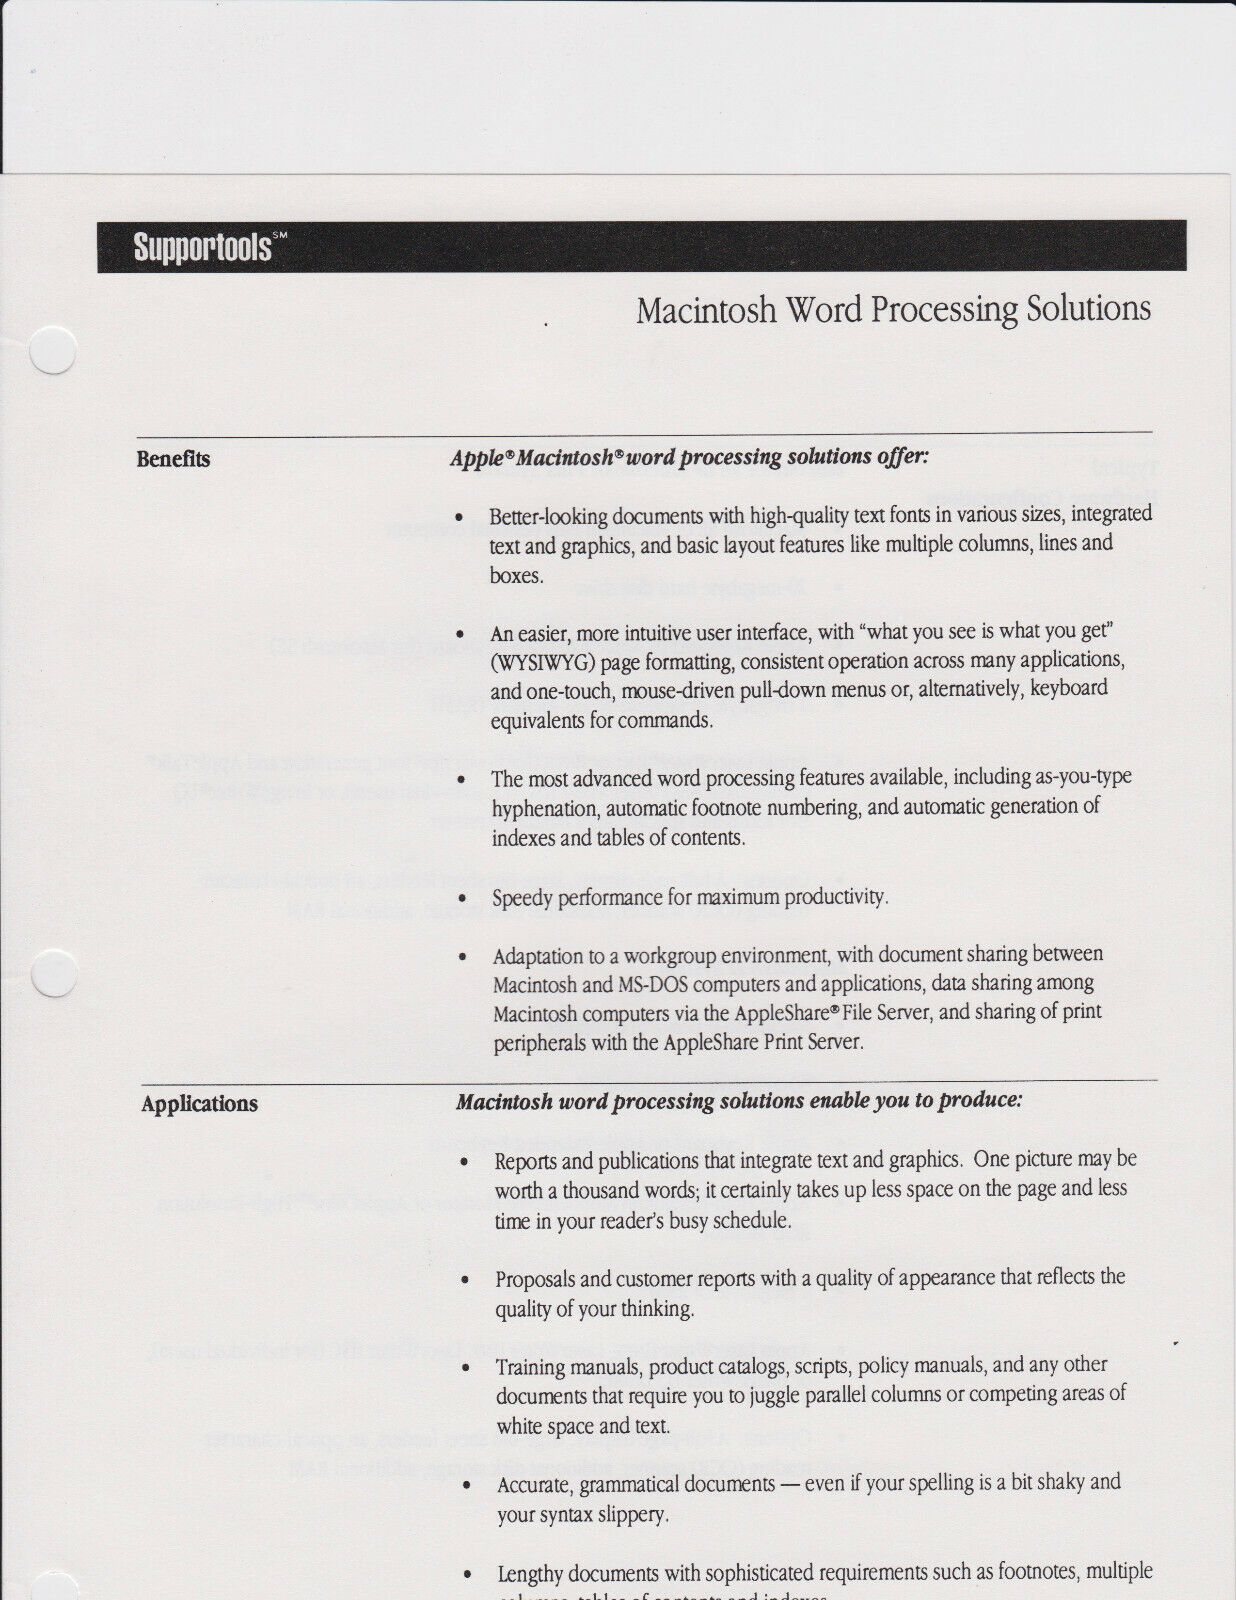 Macintosh Word Processing Solutions (4pages) Final Price